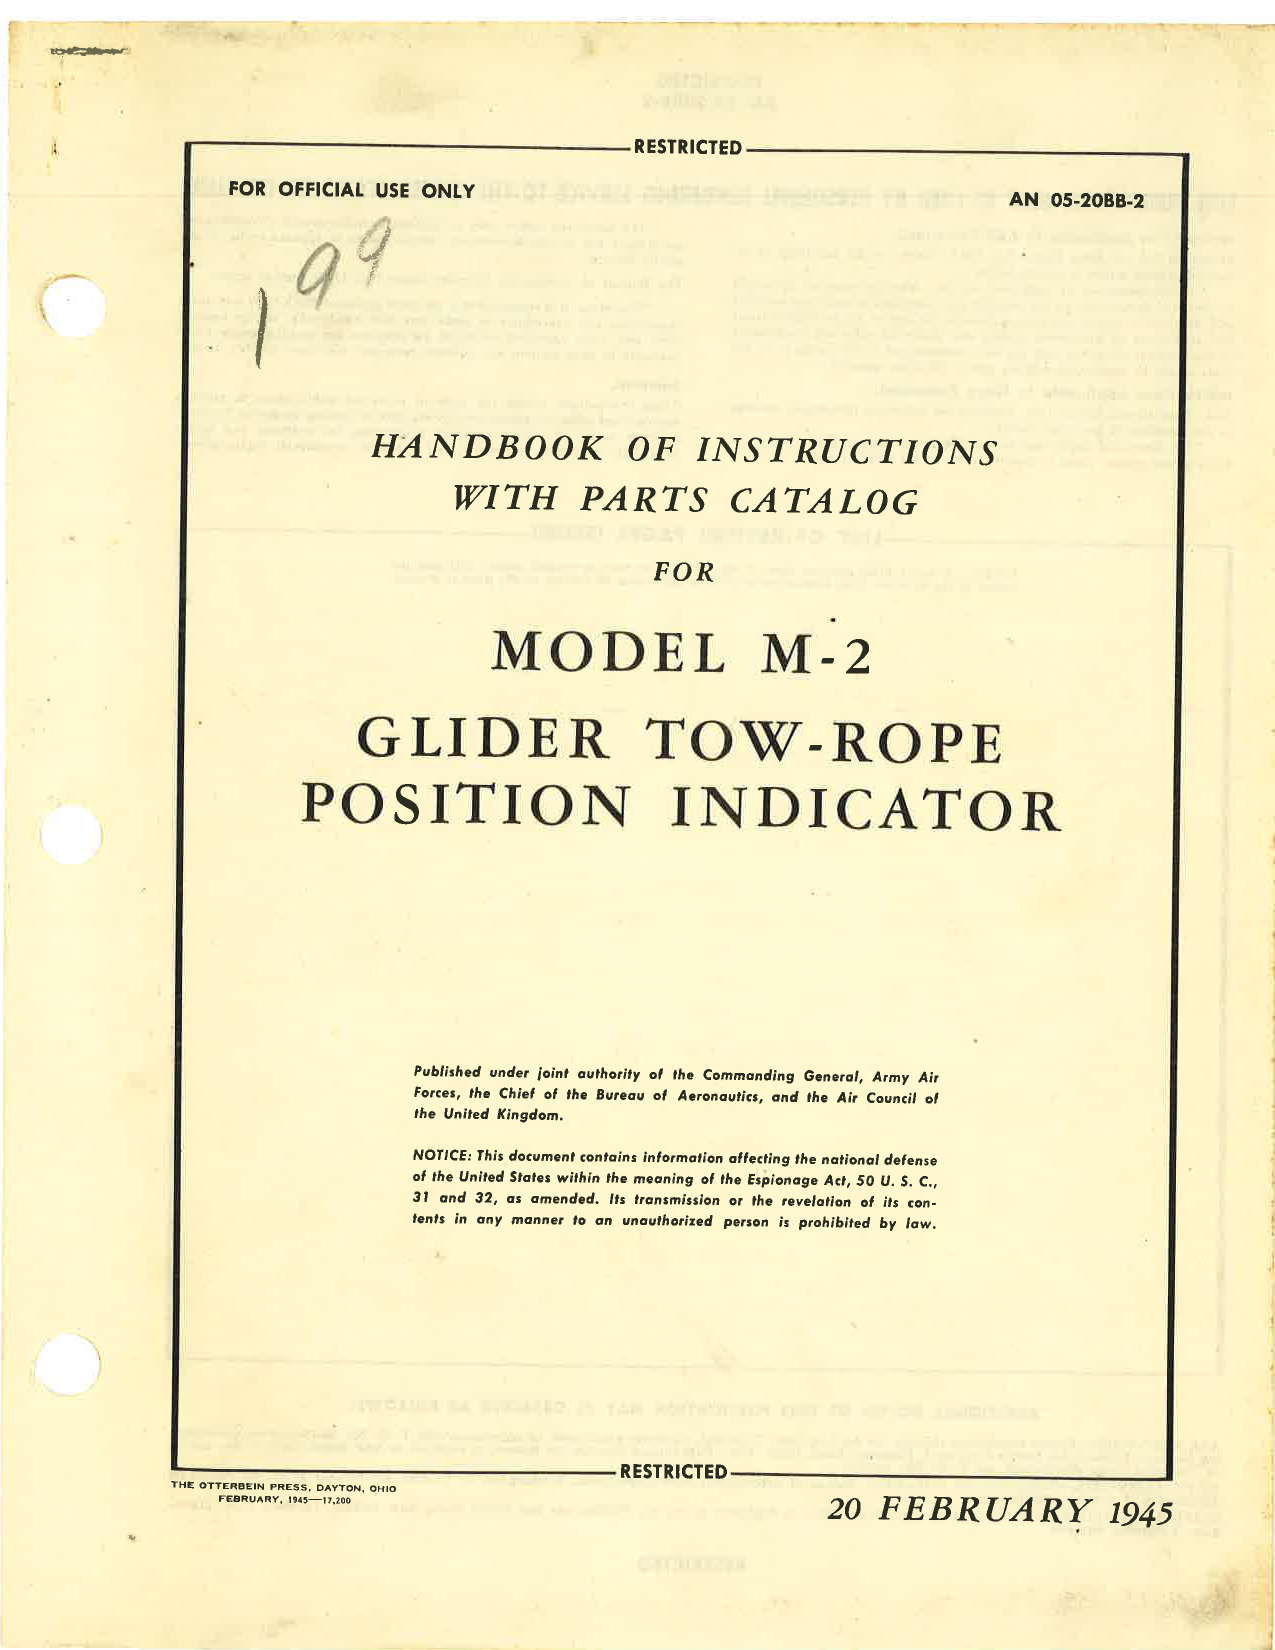 Sample page 1 from AirCorps Library document: Handbook of Instructions with Parts Catalog for Model M-2 Glider Tow-Rope Position Indicator